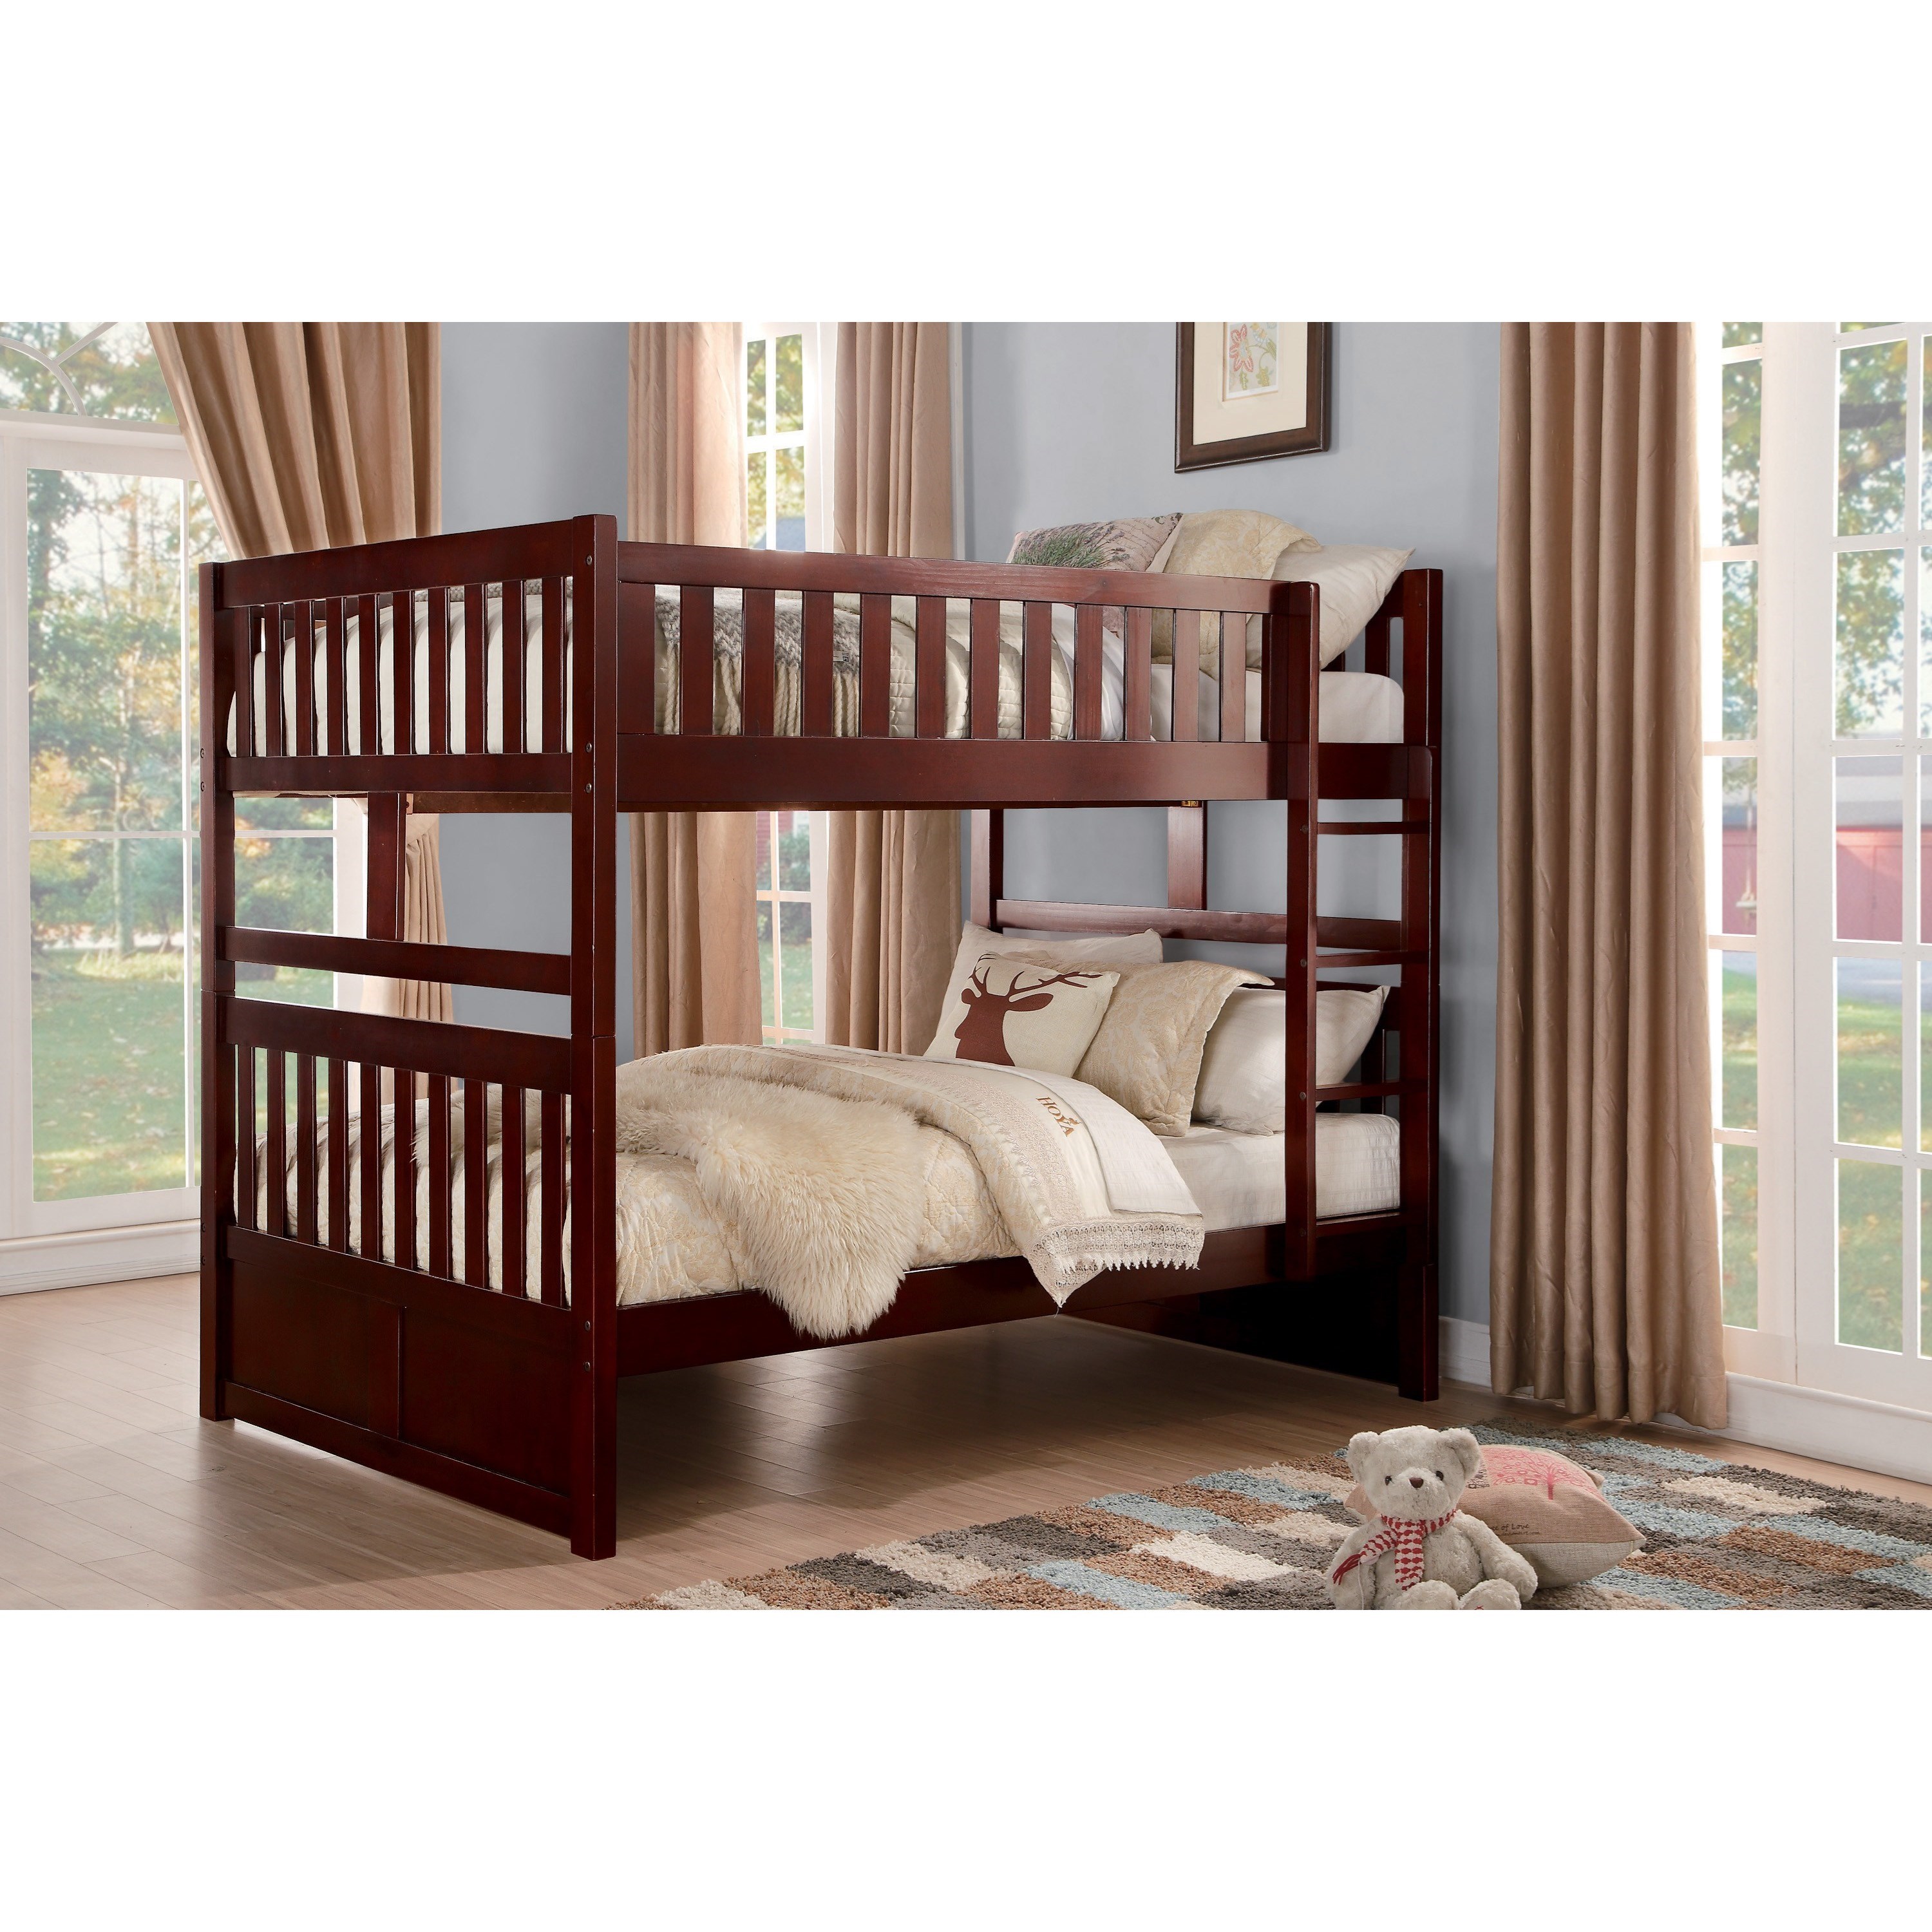 bunk bed over full size bed